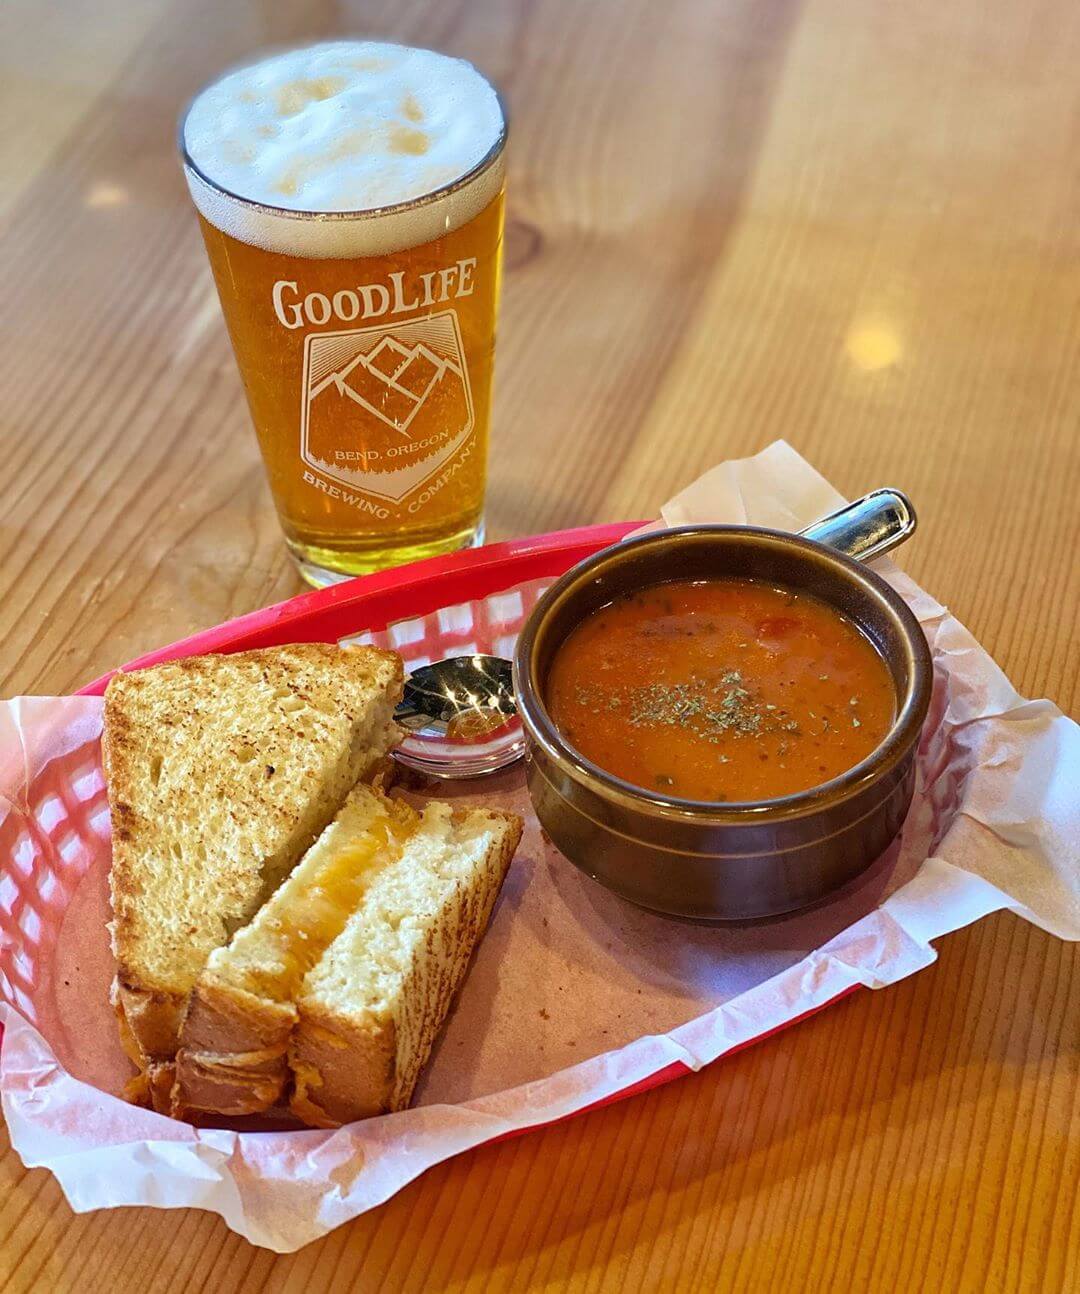 Lunch is served with a fresh pint of Mountain Rescue for Locals Day! Sometimes you just need to order off the kids menu in the pub and go with a classic. Head on down after work and enjoy Locals Day! #whatsyourgoodlife #localsday